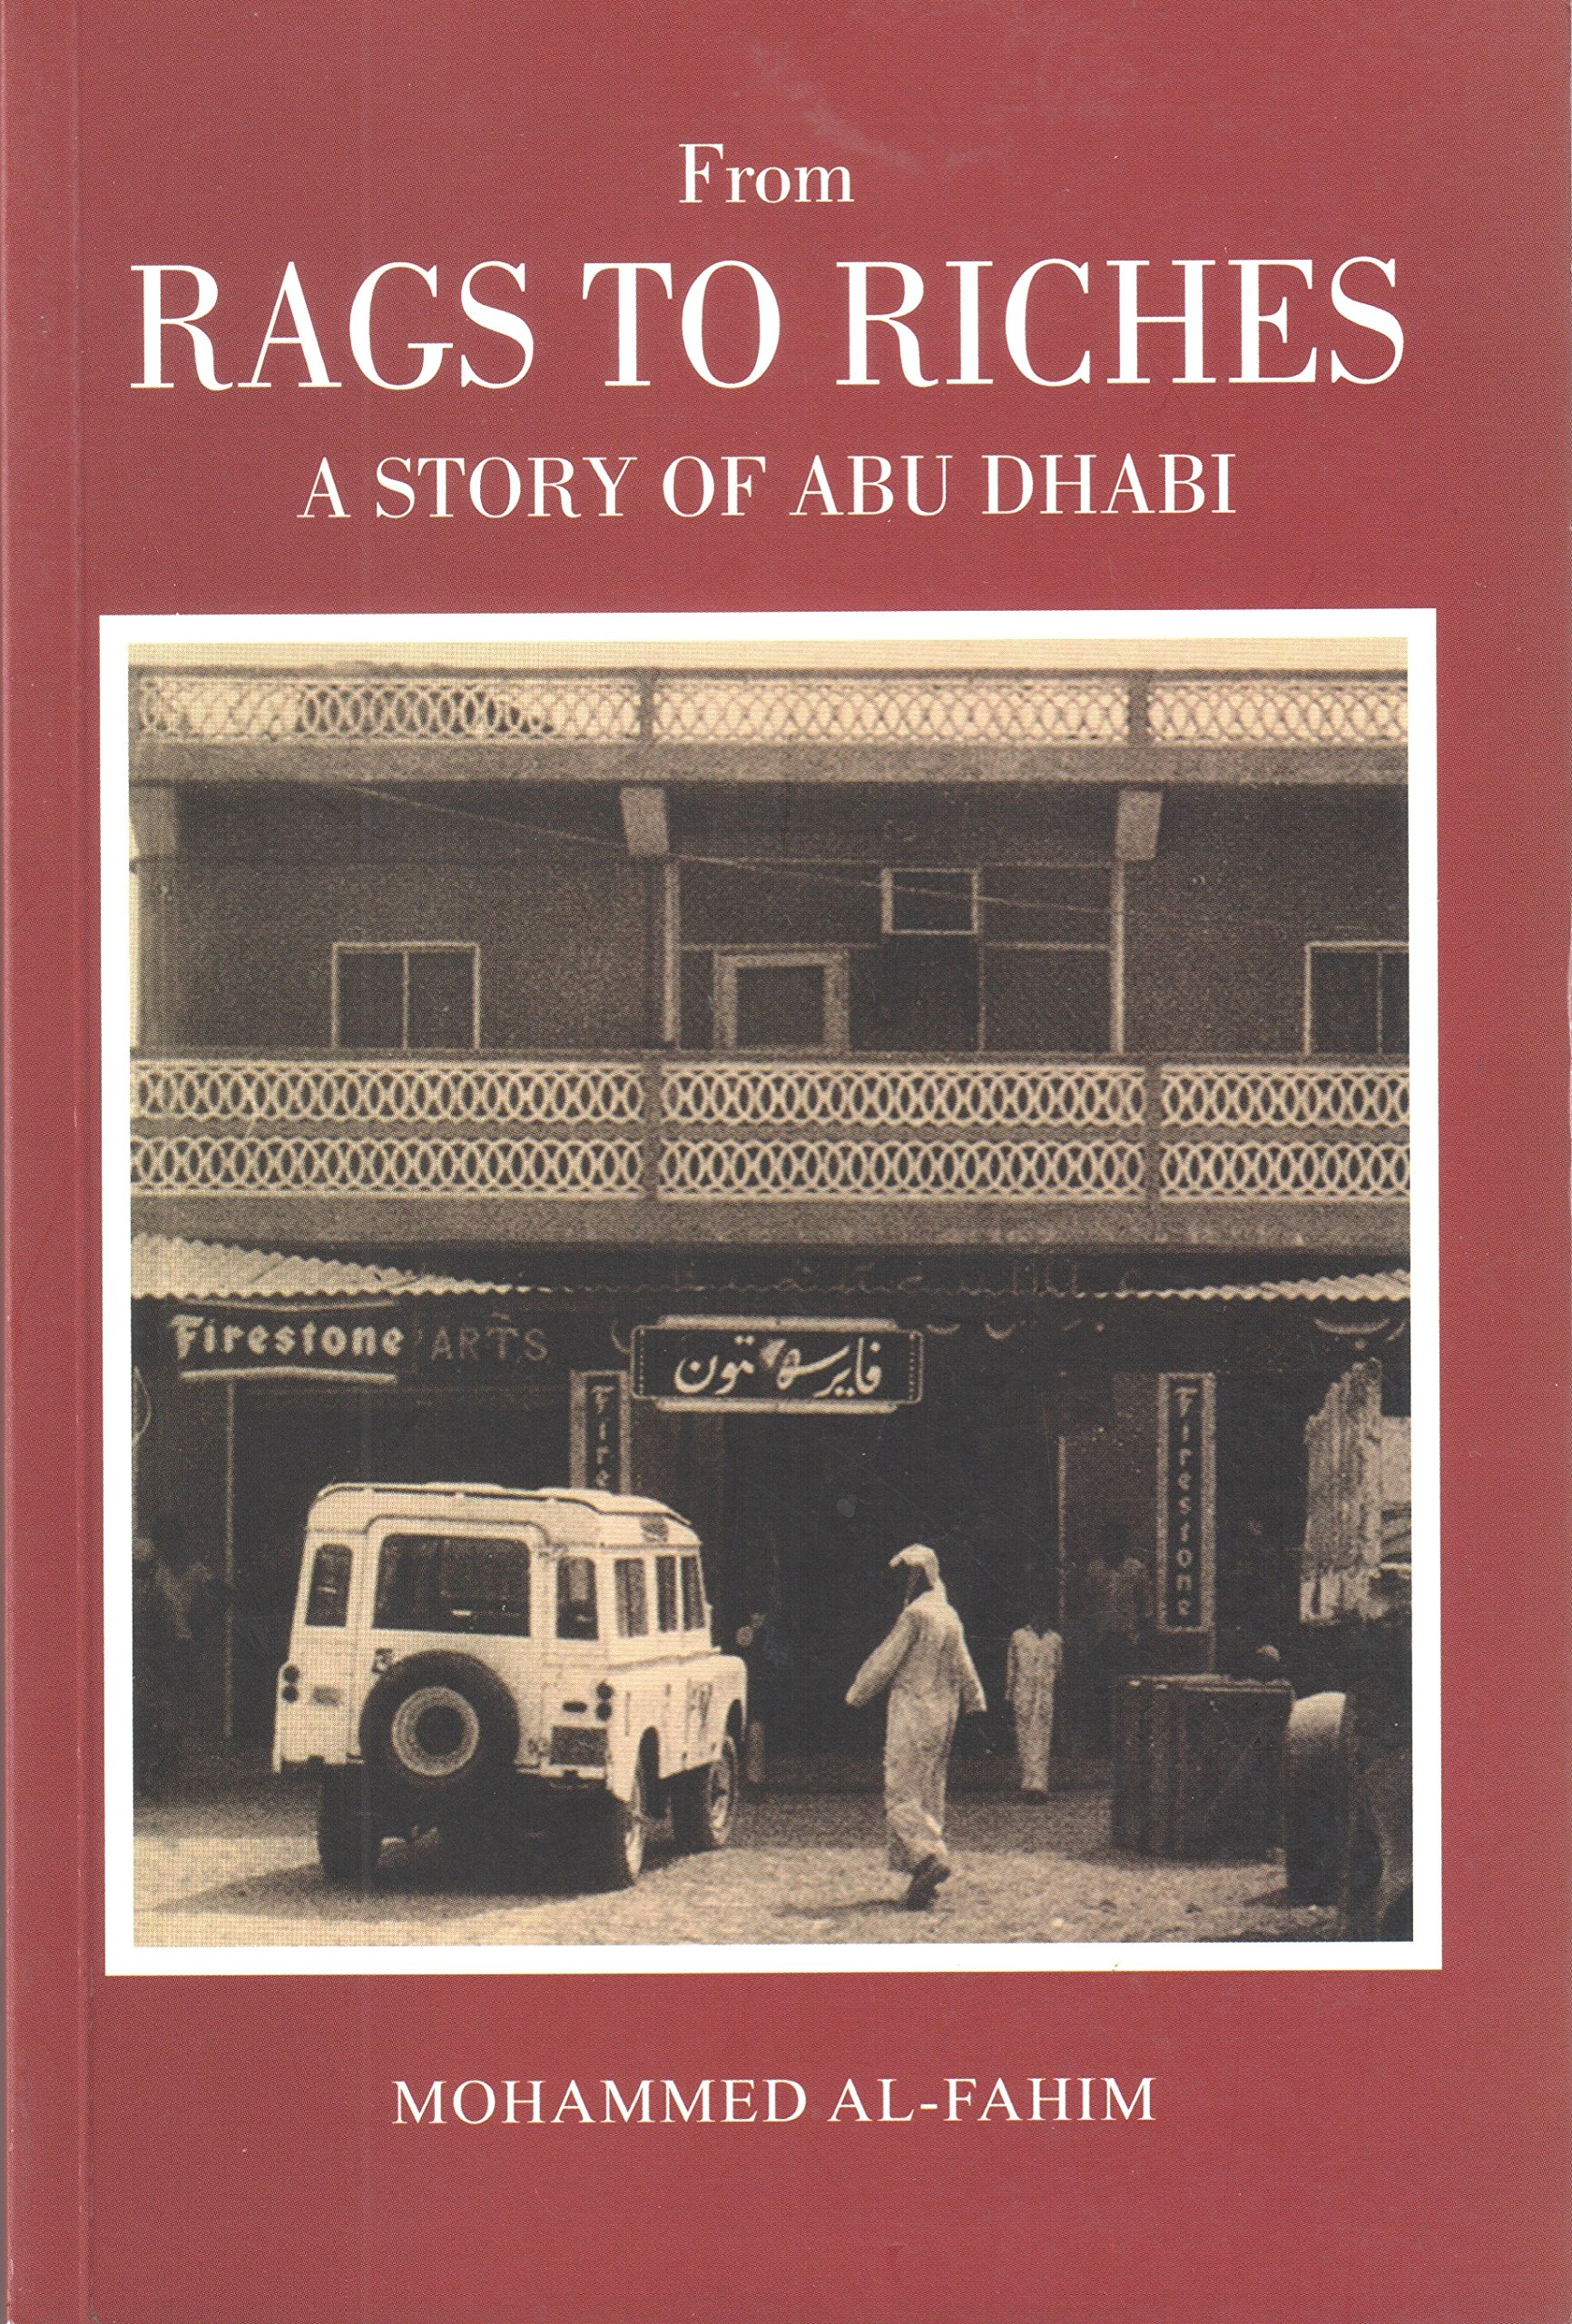 From Rags to Riches: A Story of Abu Dhabi